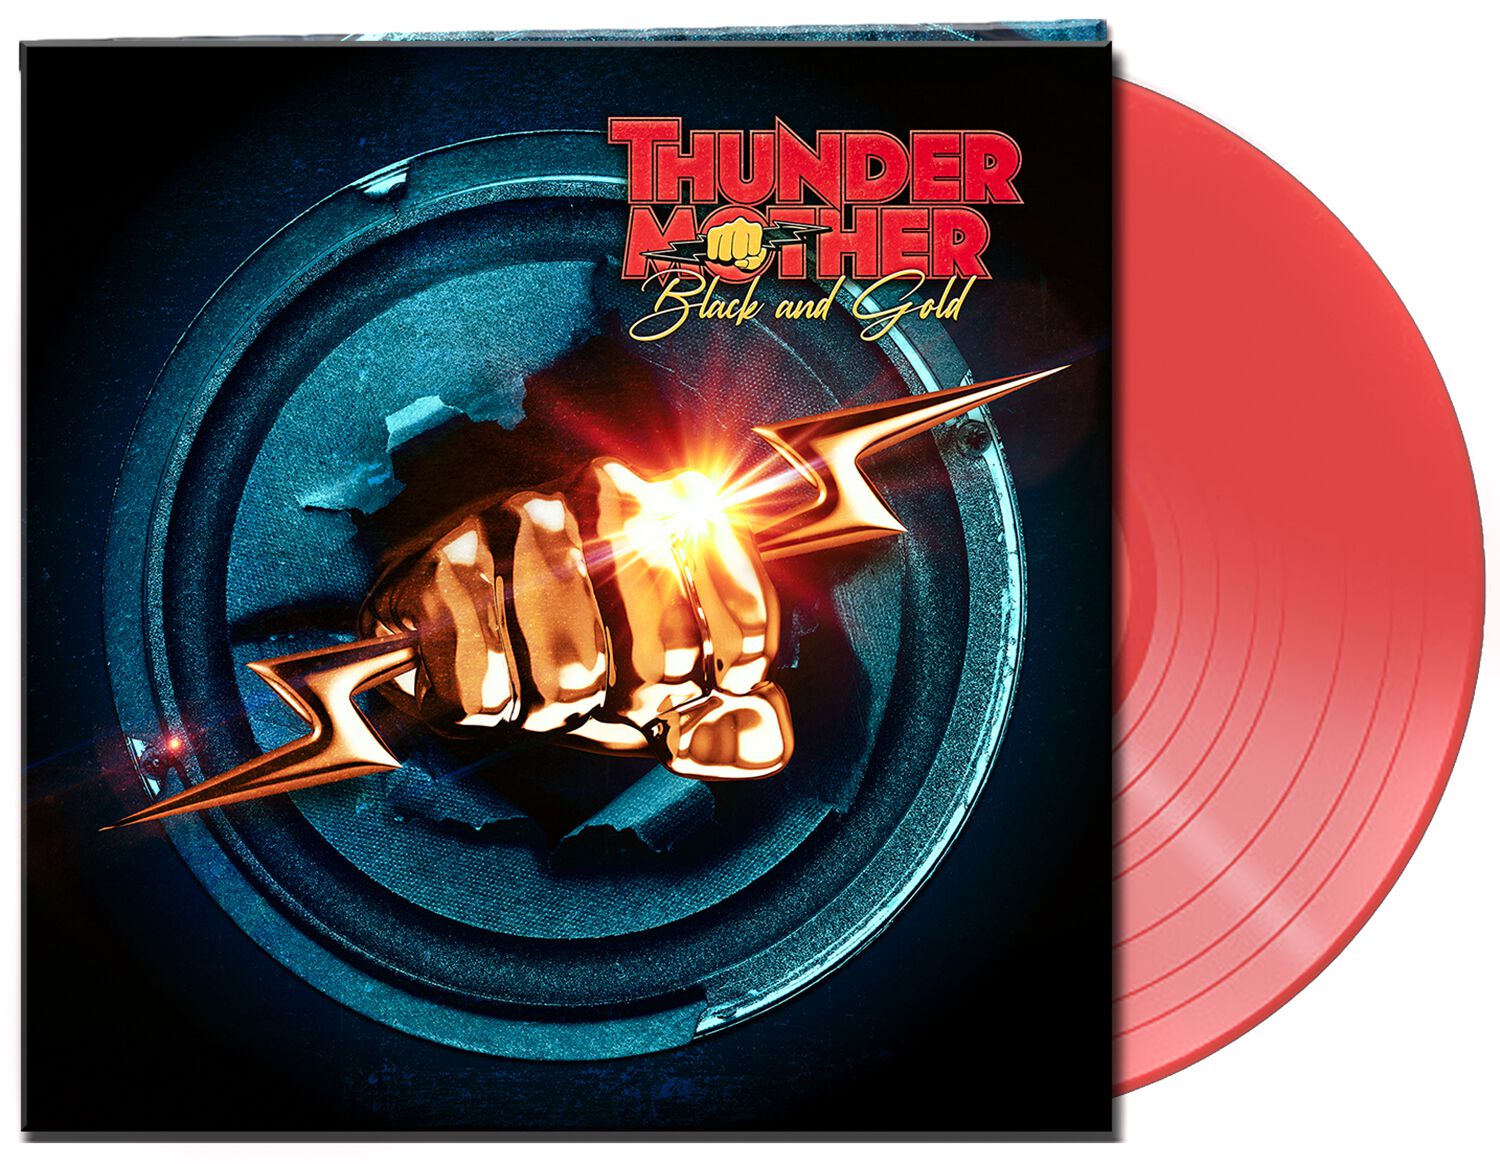 Thundermother Black and gold LP red